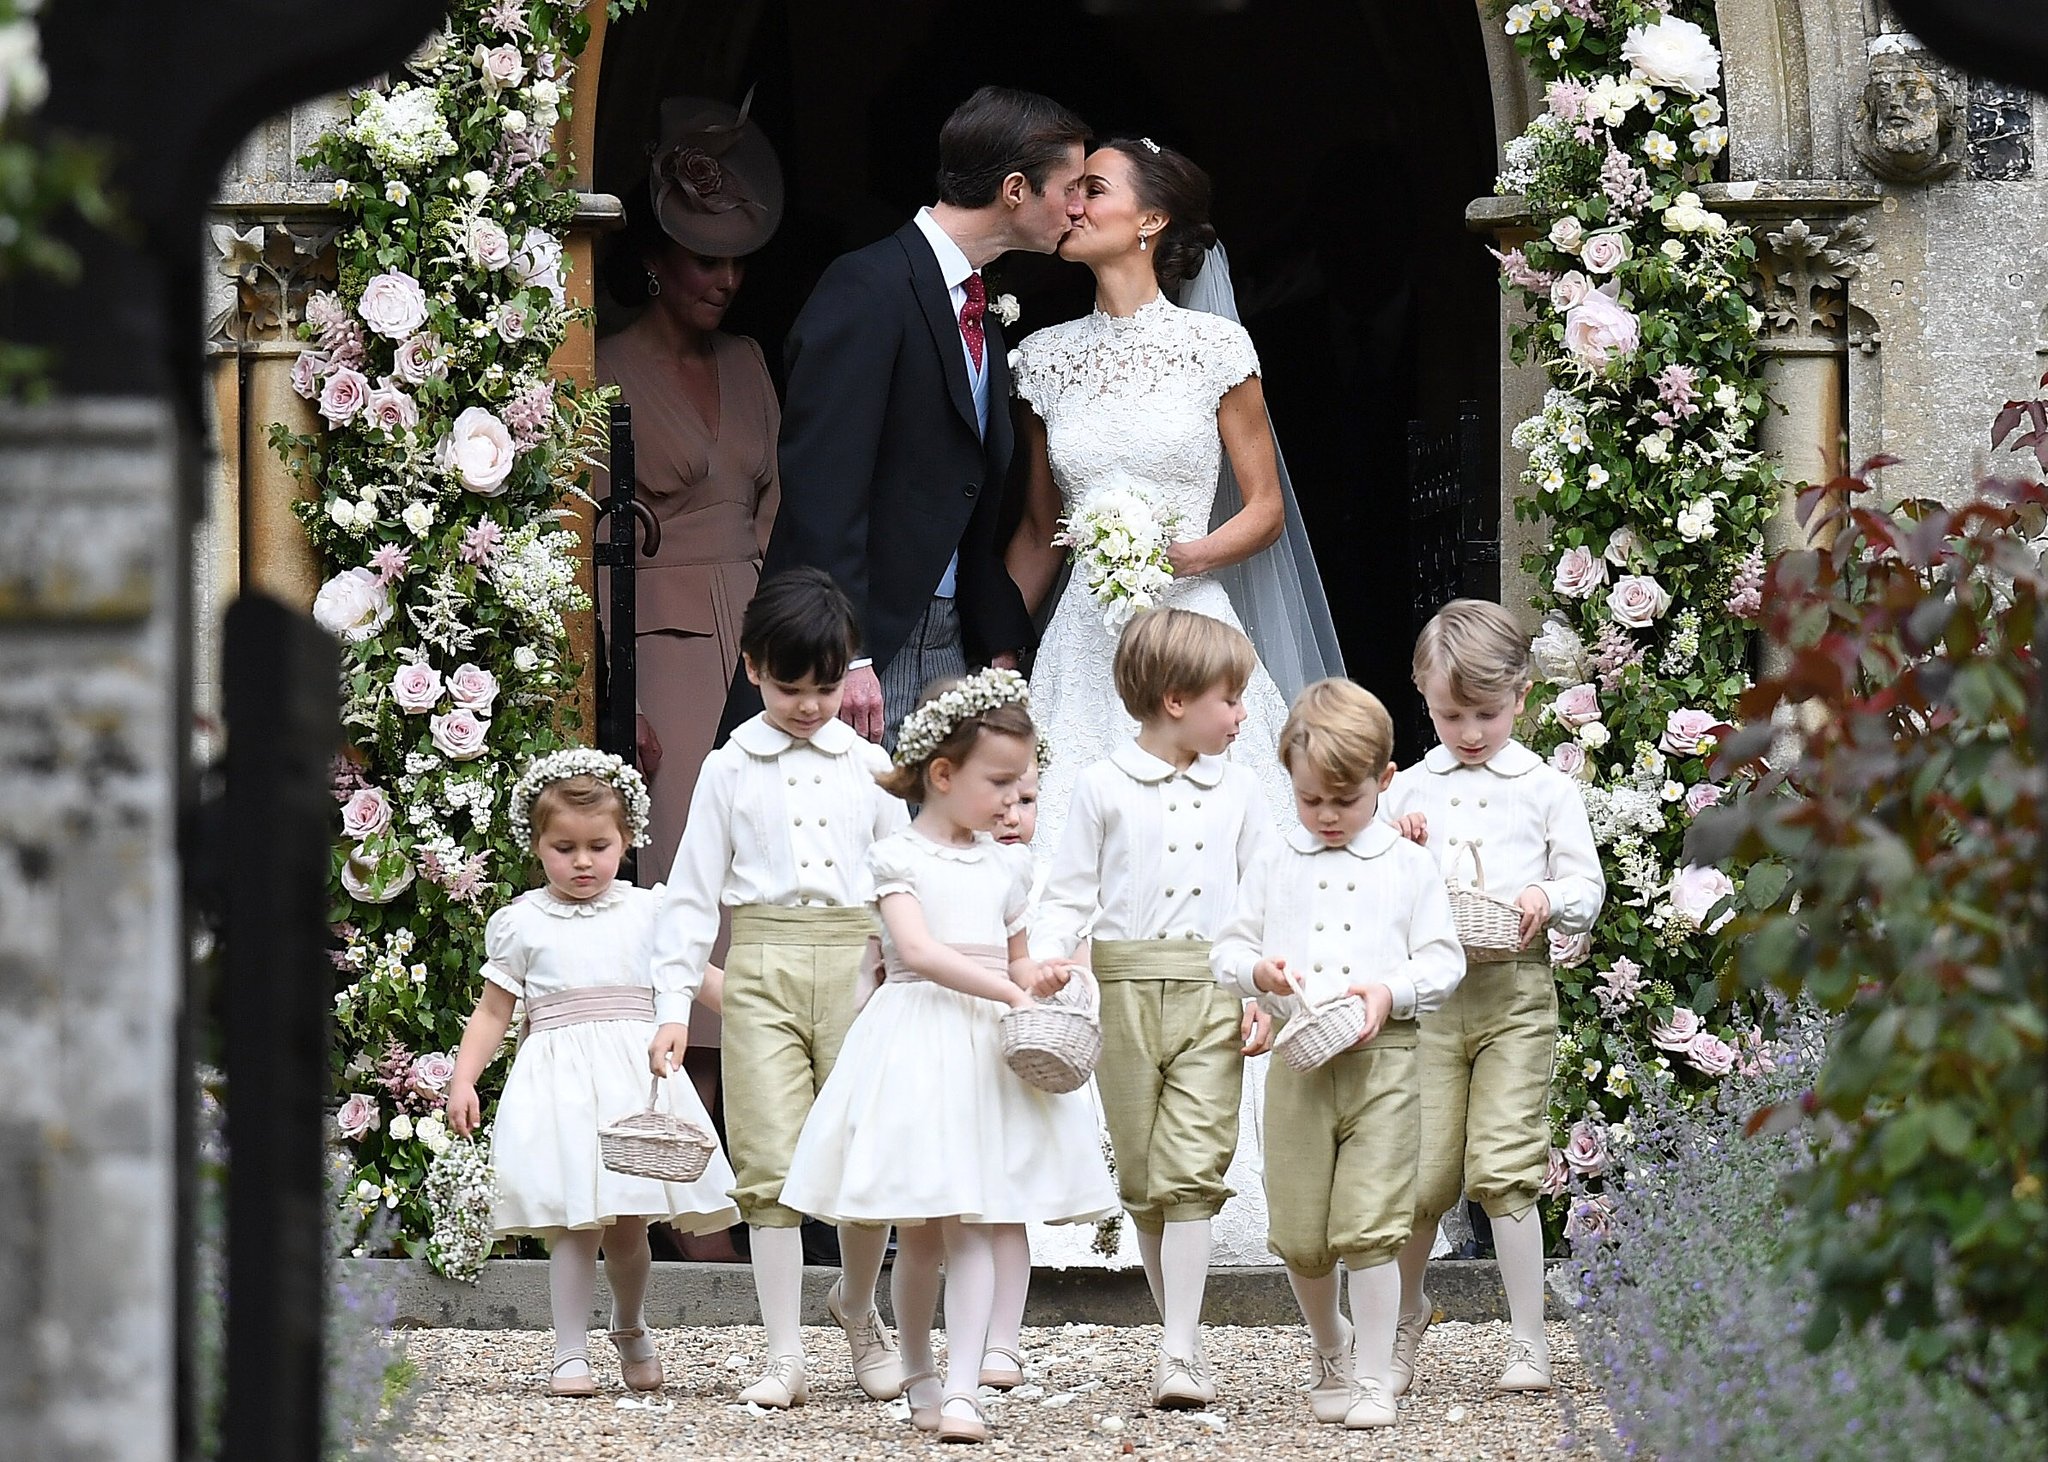 Meet All the People in Pippa Middleton’s Wedding Party